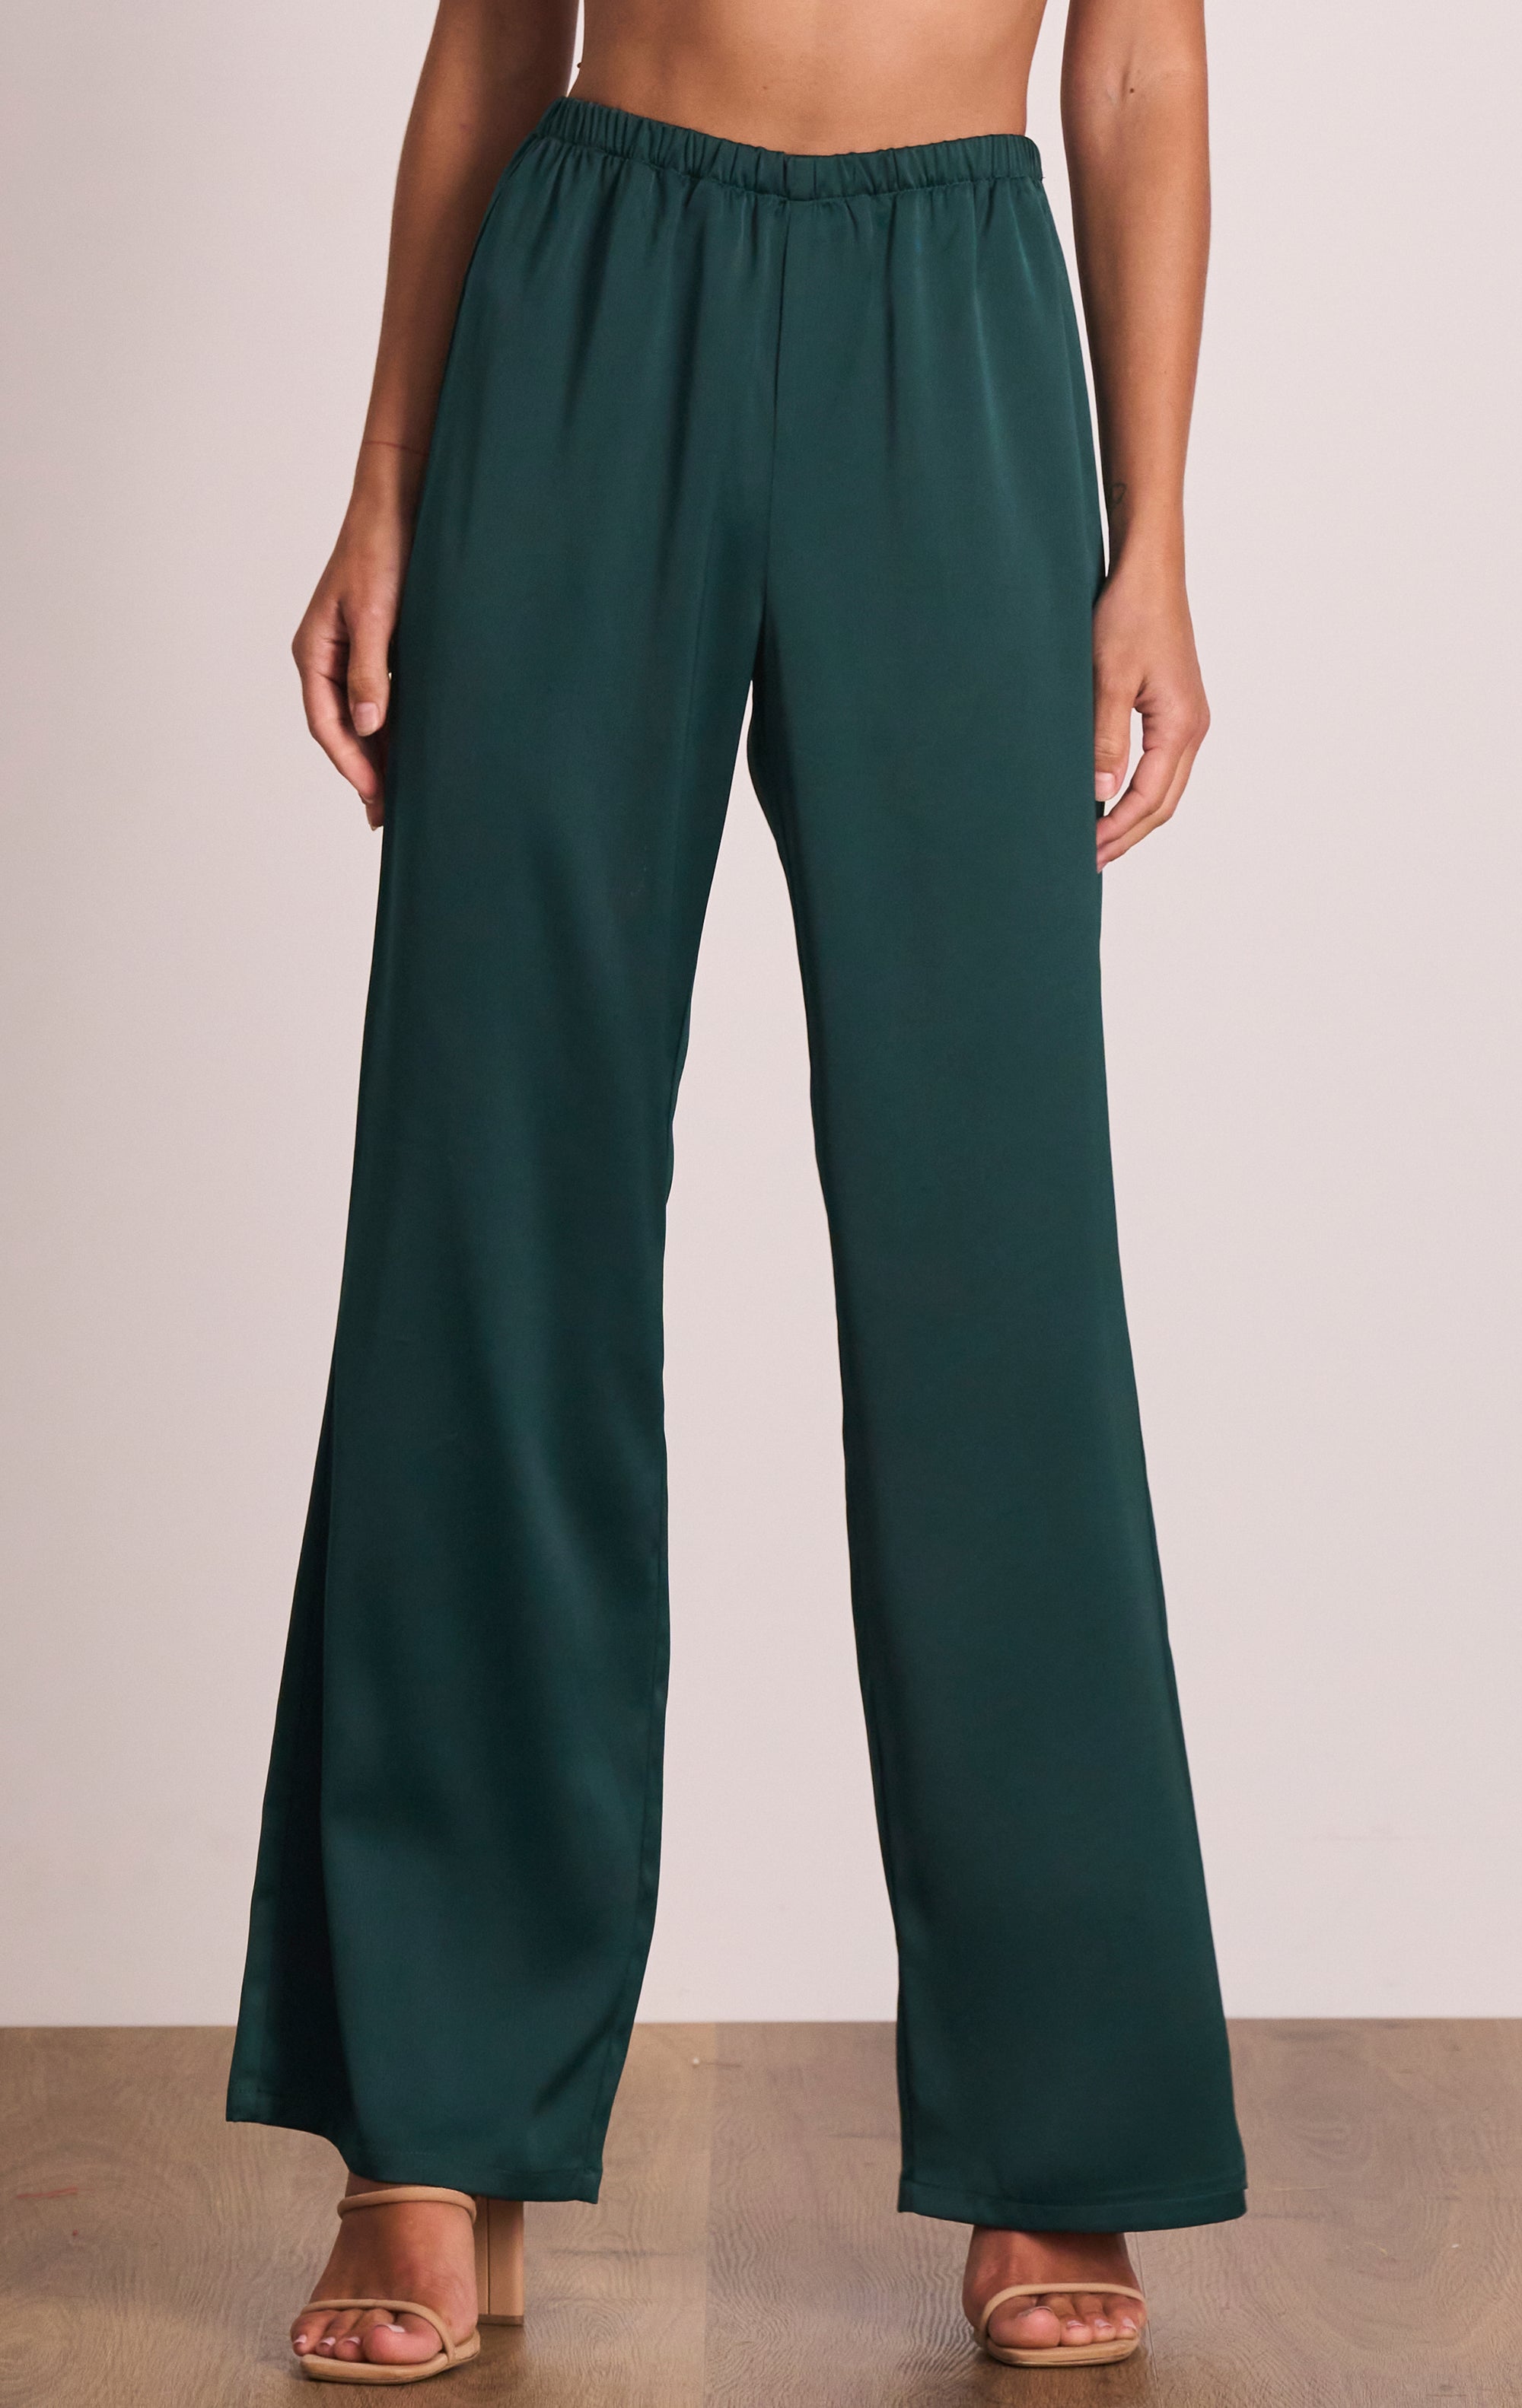 Luminous Pant - TAKE 40% OFF DISCOUNT APPLIED AT CHECKOUT